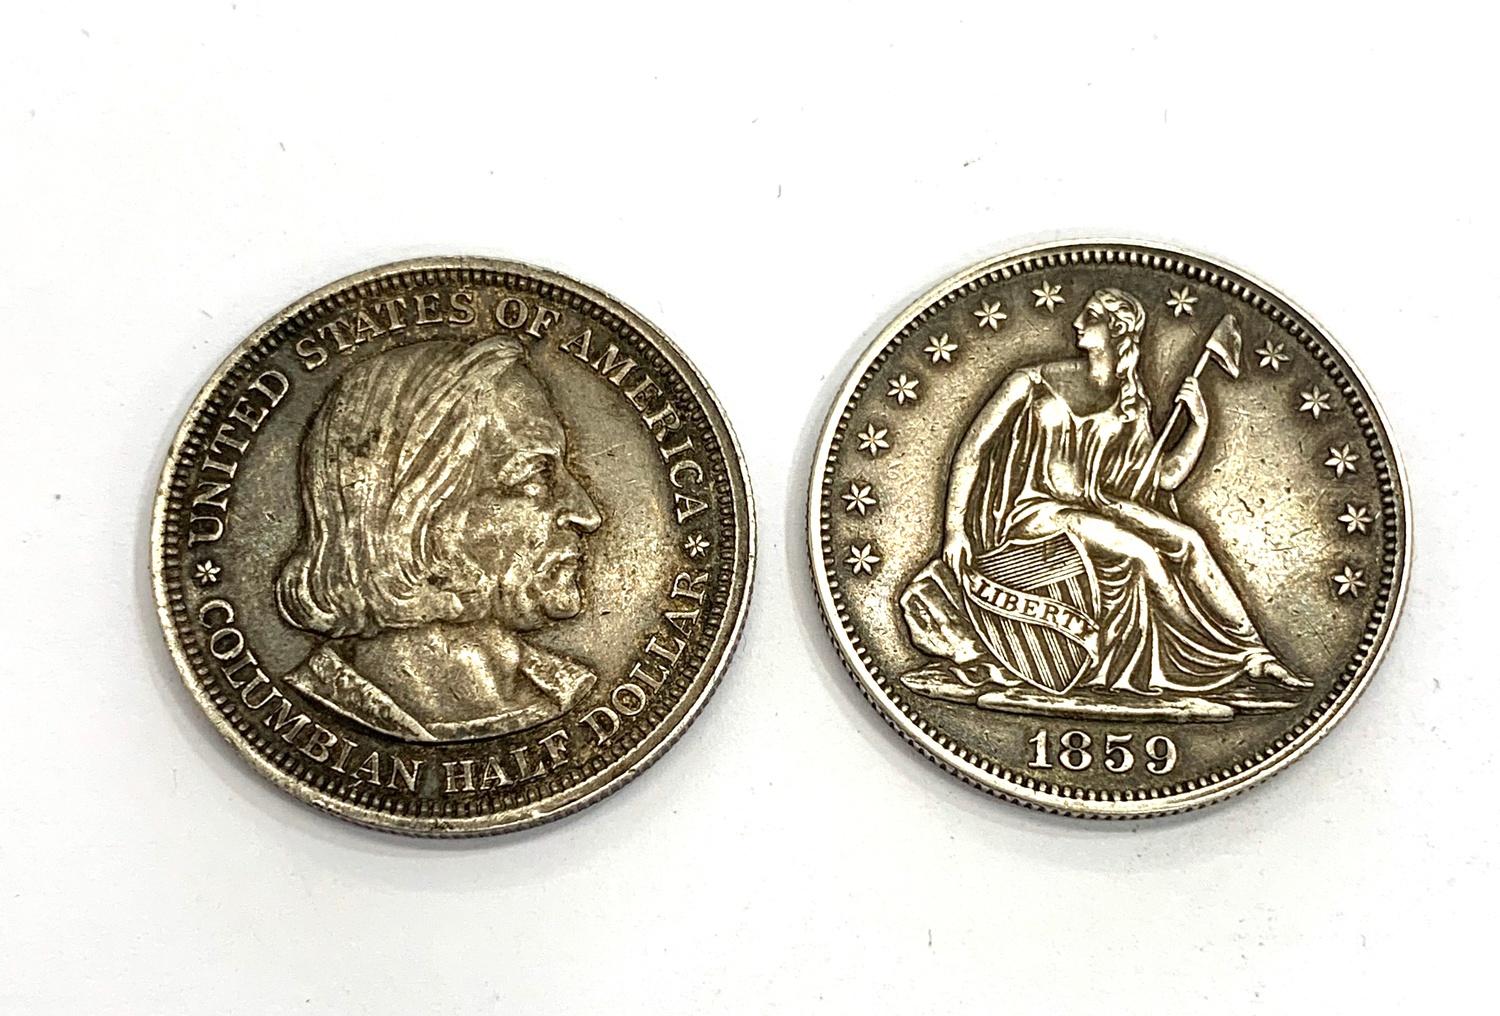 2 Antique silver USA half dollars 1893 worlds Columbian exposition Chicago and 1859 half dollar - Image 2 of 2